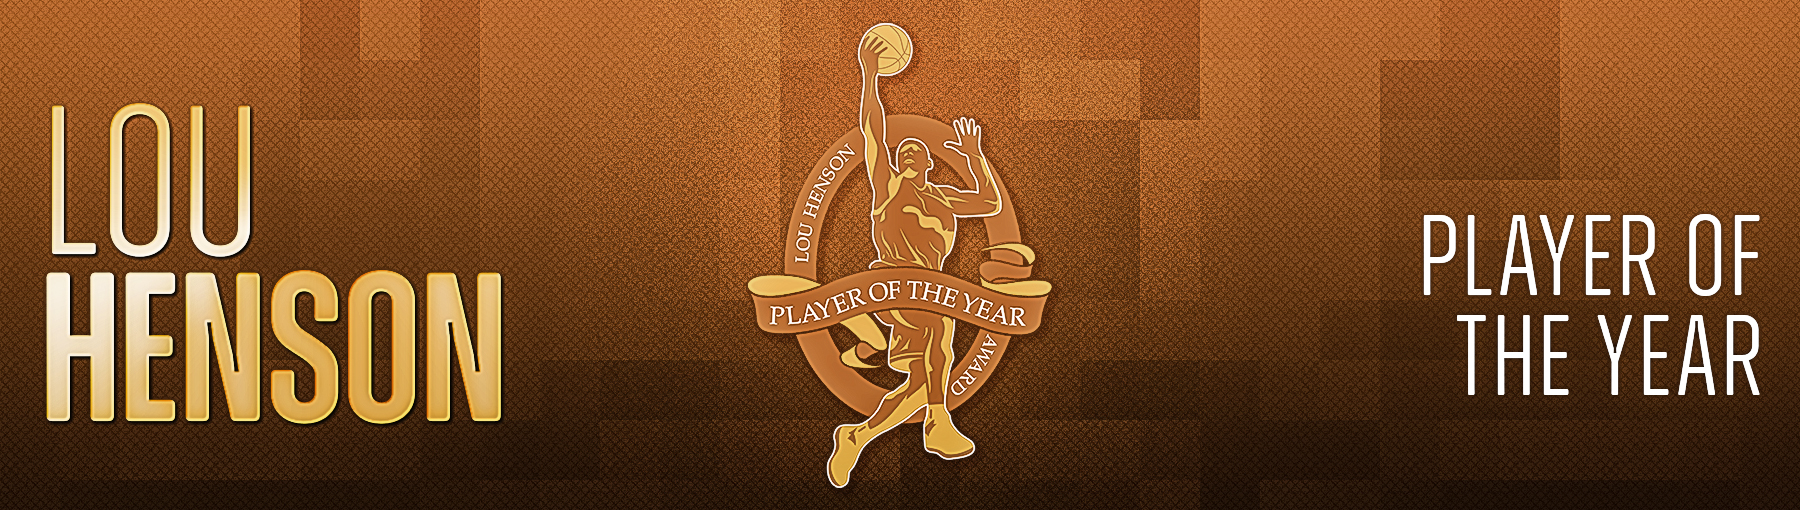 The Lou Henson National Player of the Year Award, College Basketball Awards